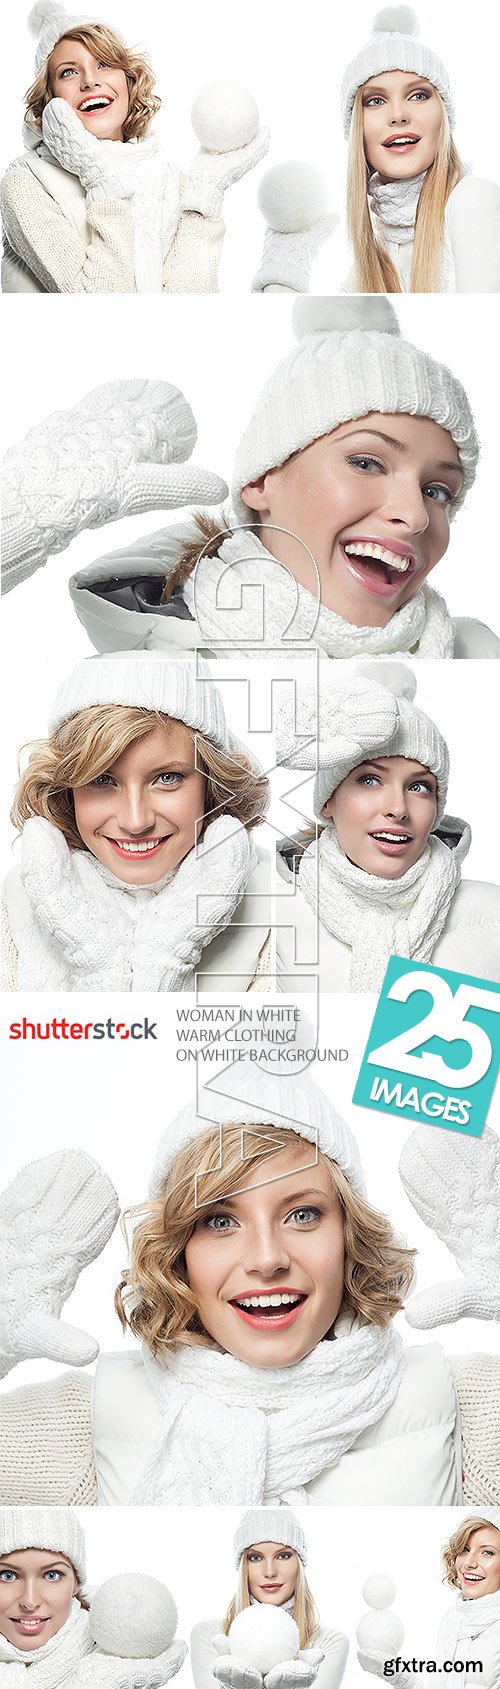 Woman in White Warm Clothing on White Background 25xJPG